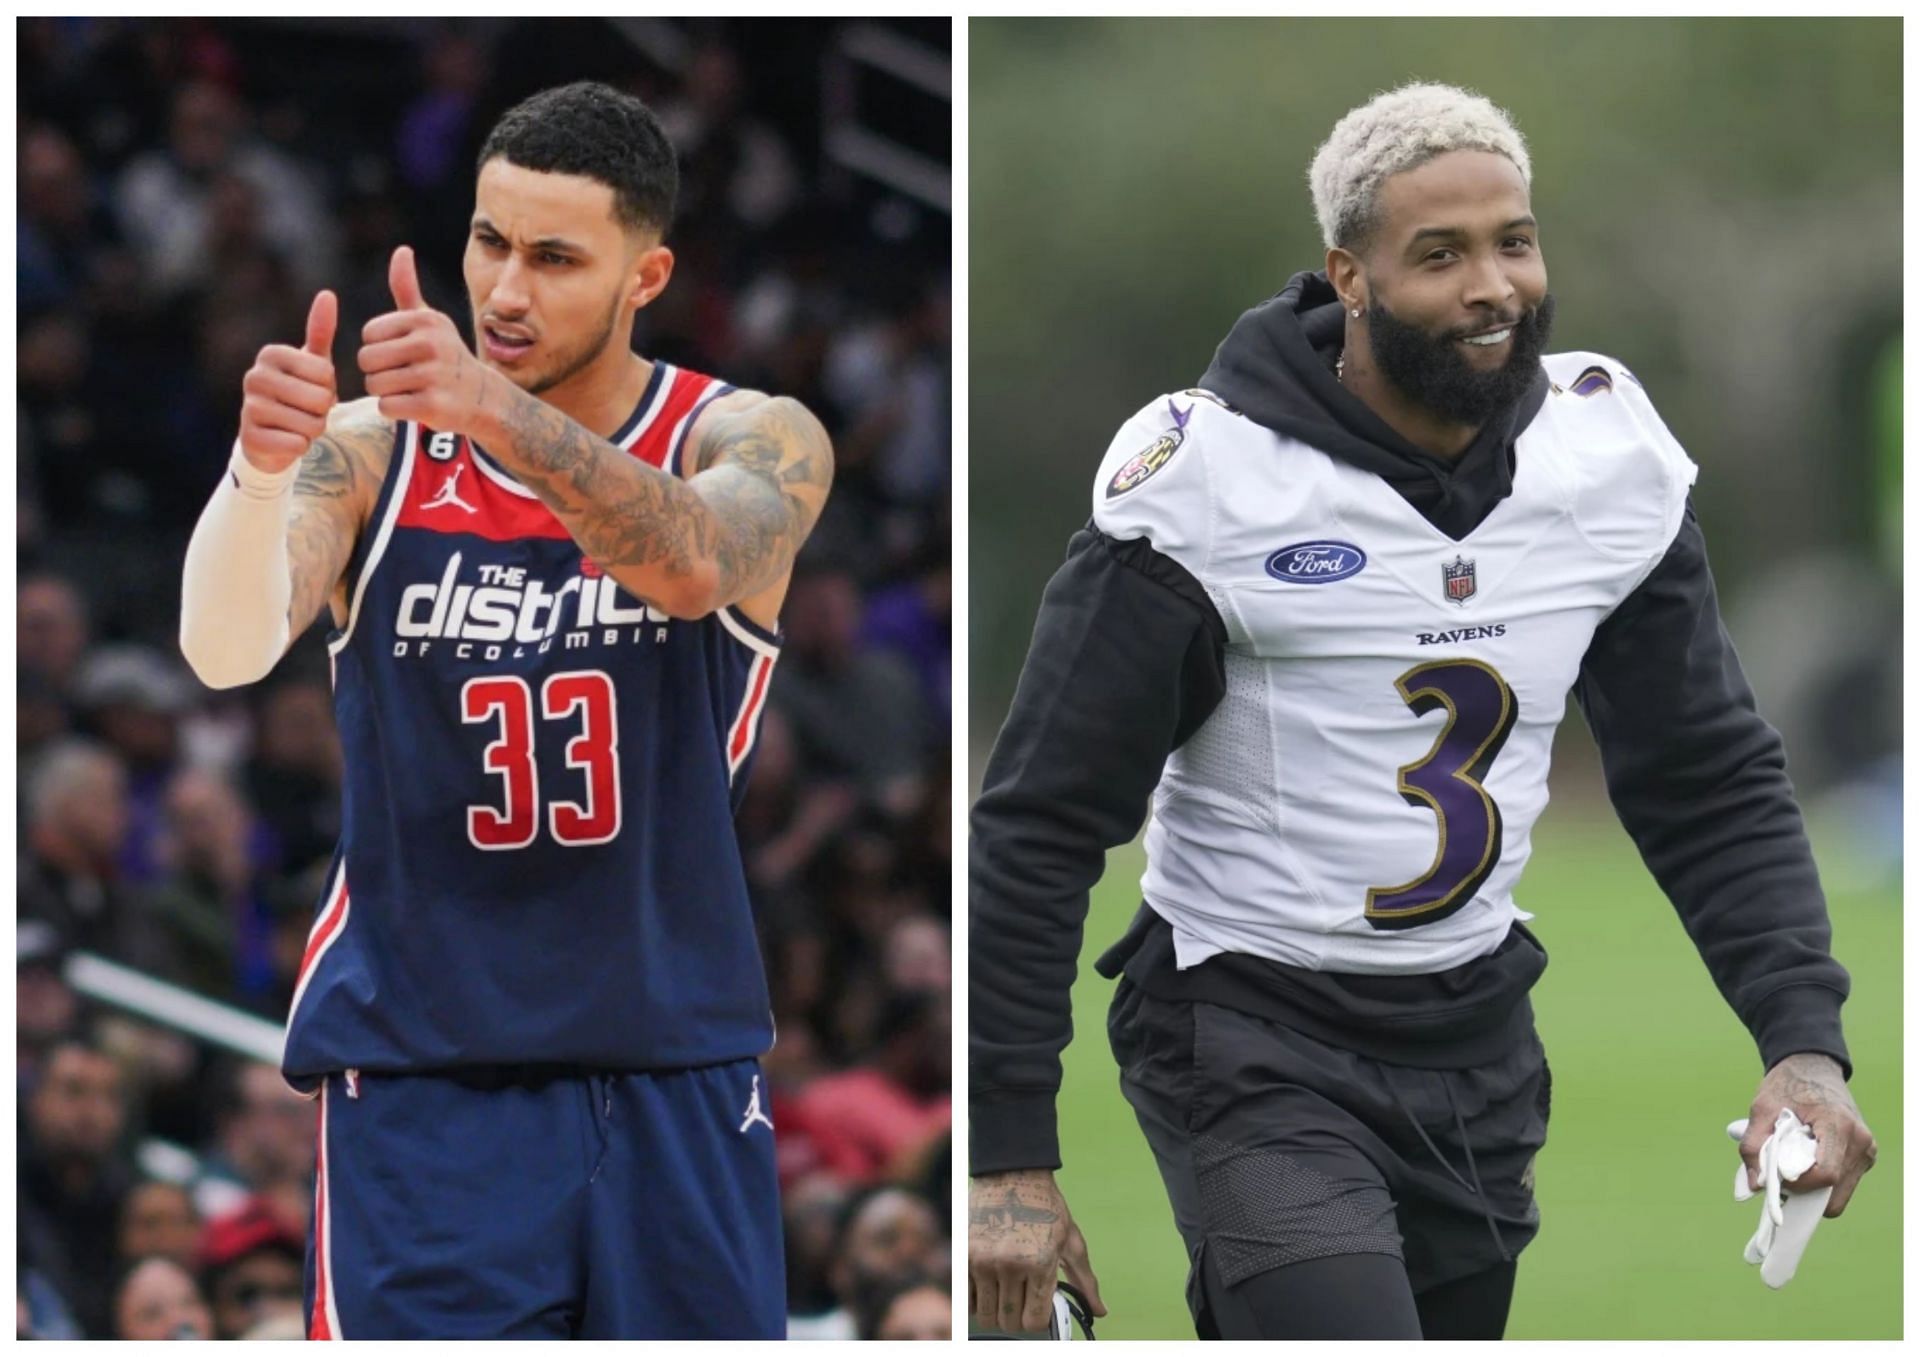 Kyle Kuzma &amp; Odell Beckham Jr. croced out in style with $2337 Jacket before a Baltimore Ravens game